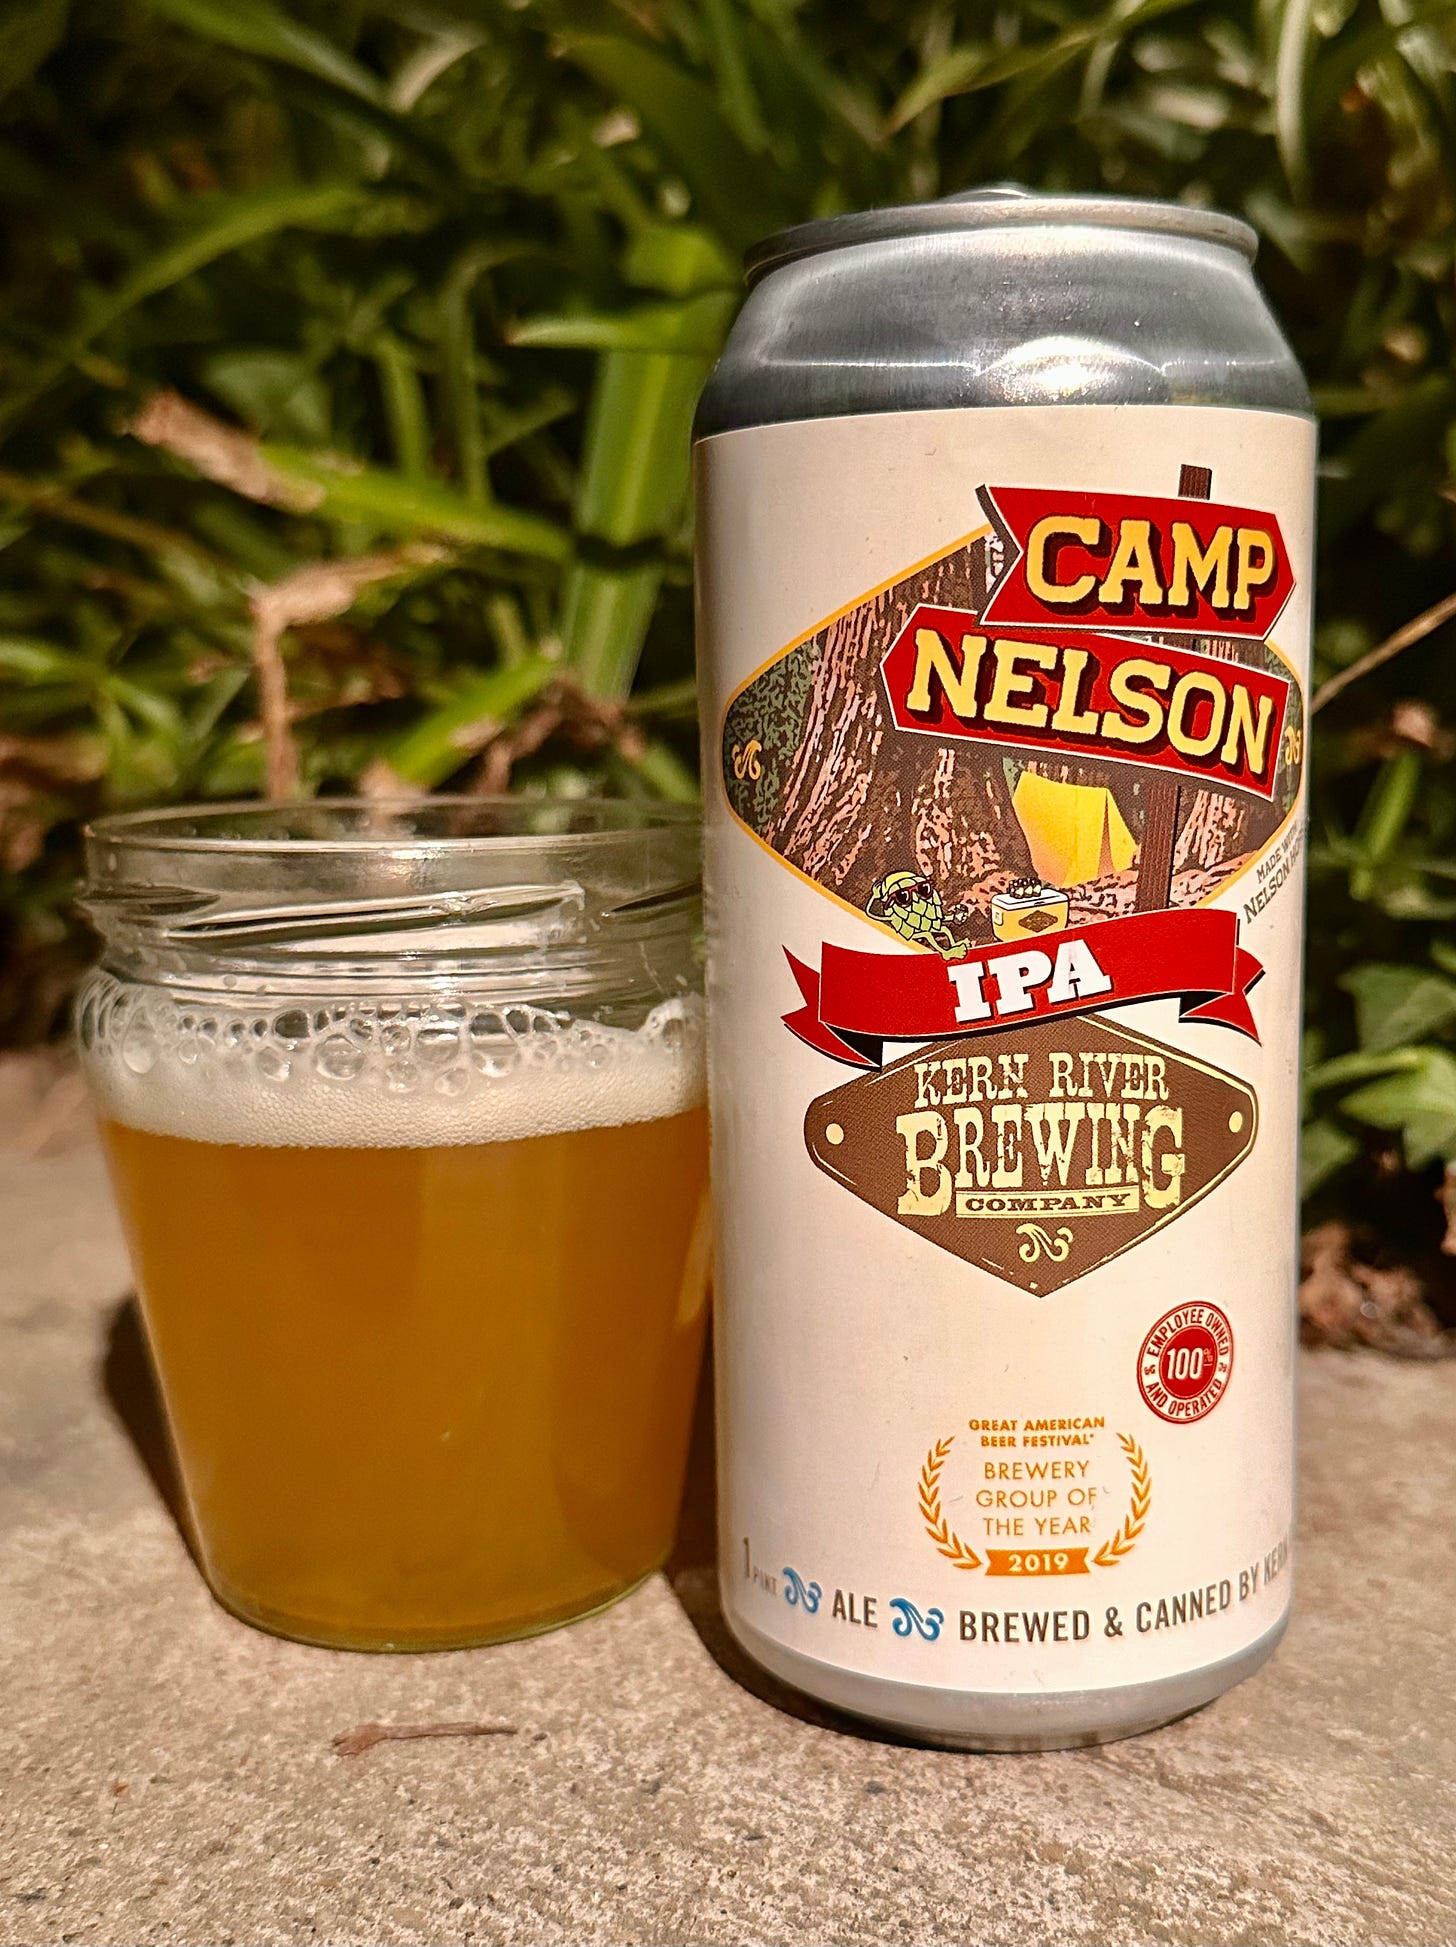 A glass full of beer by Kern River Brewing next to a can of Camp Nelson IPA. Plants are in the background.